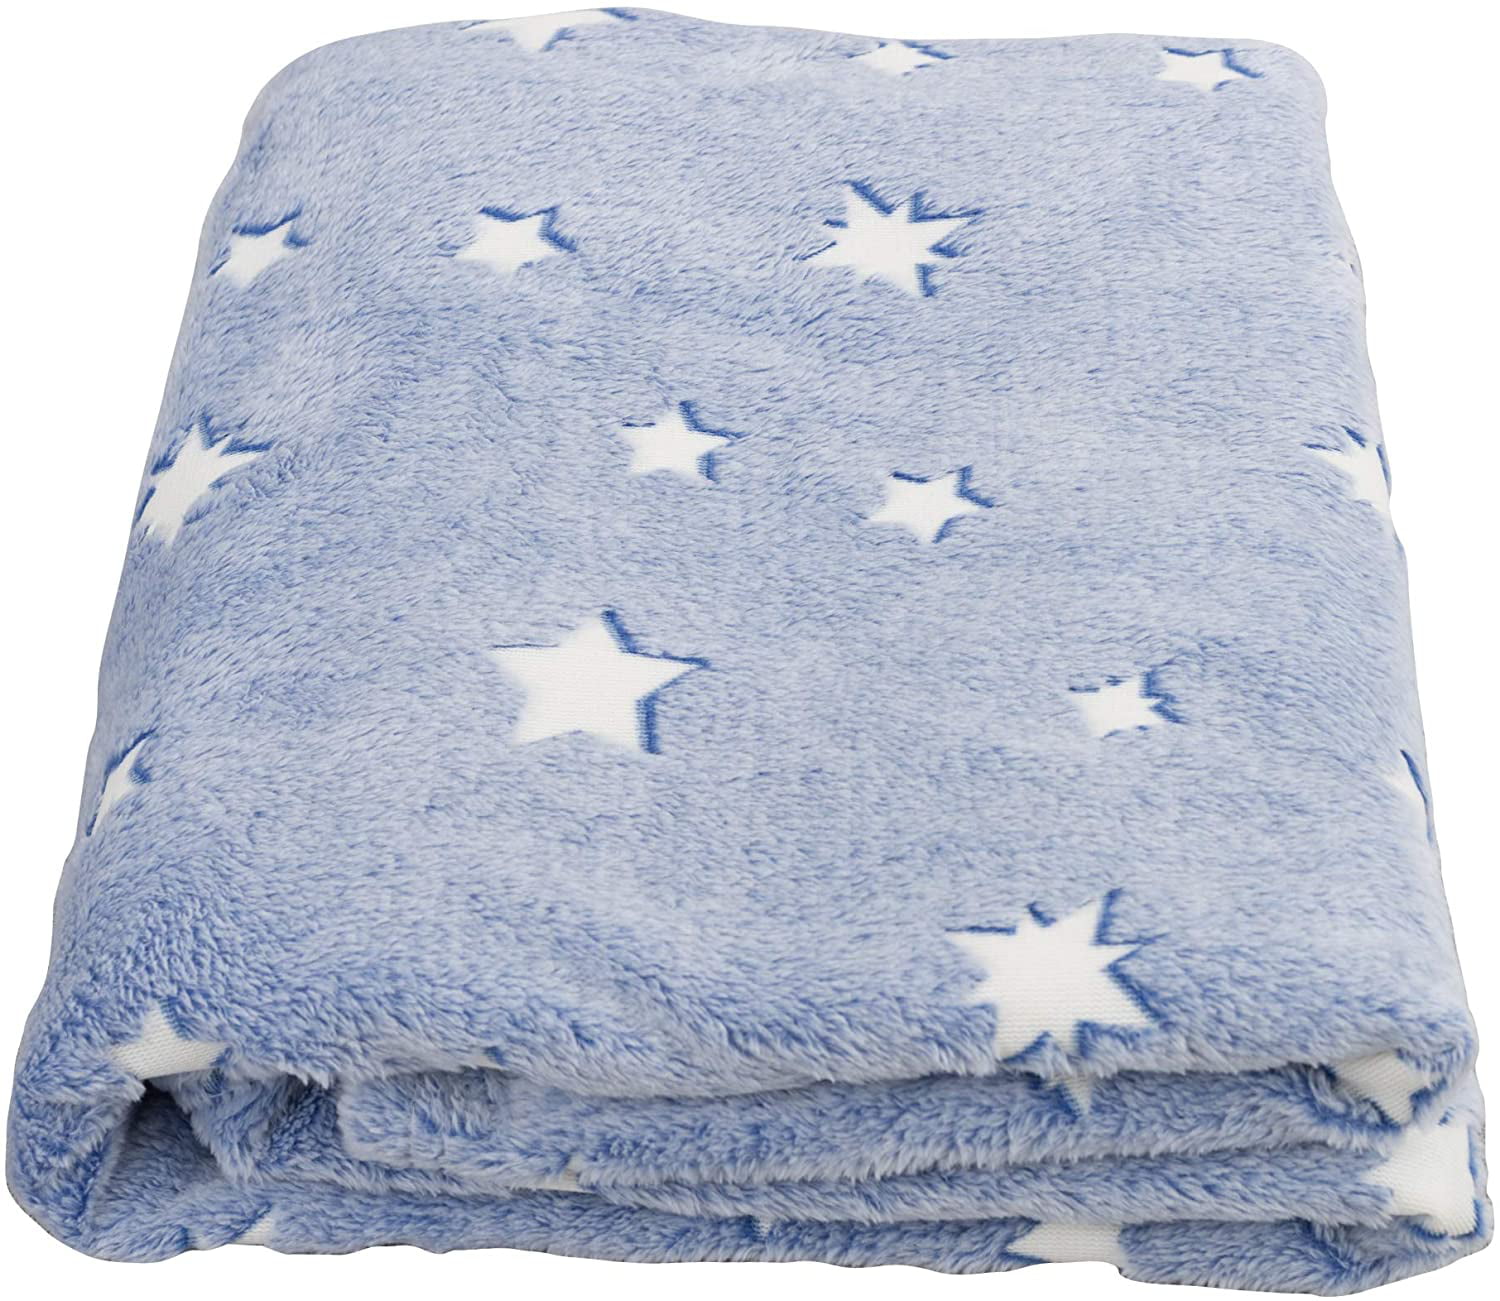 Details about   Glow in The Dark Throw Blanket Super Soft Fuzzy Plush Fleece,Decorated with Sta 